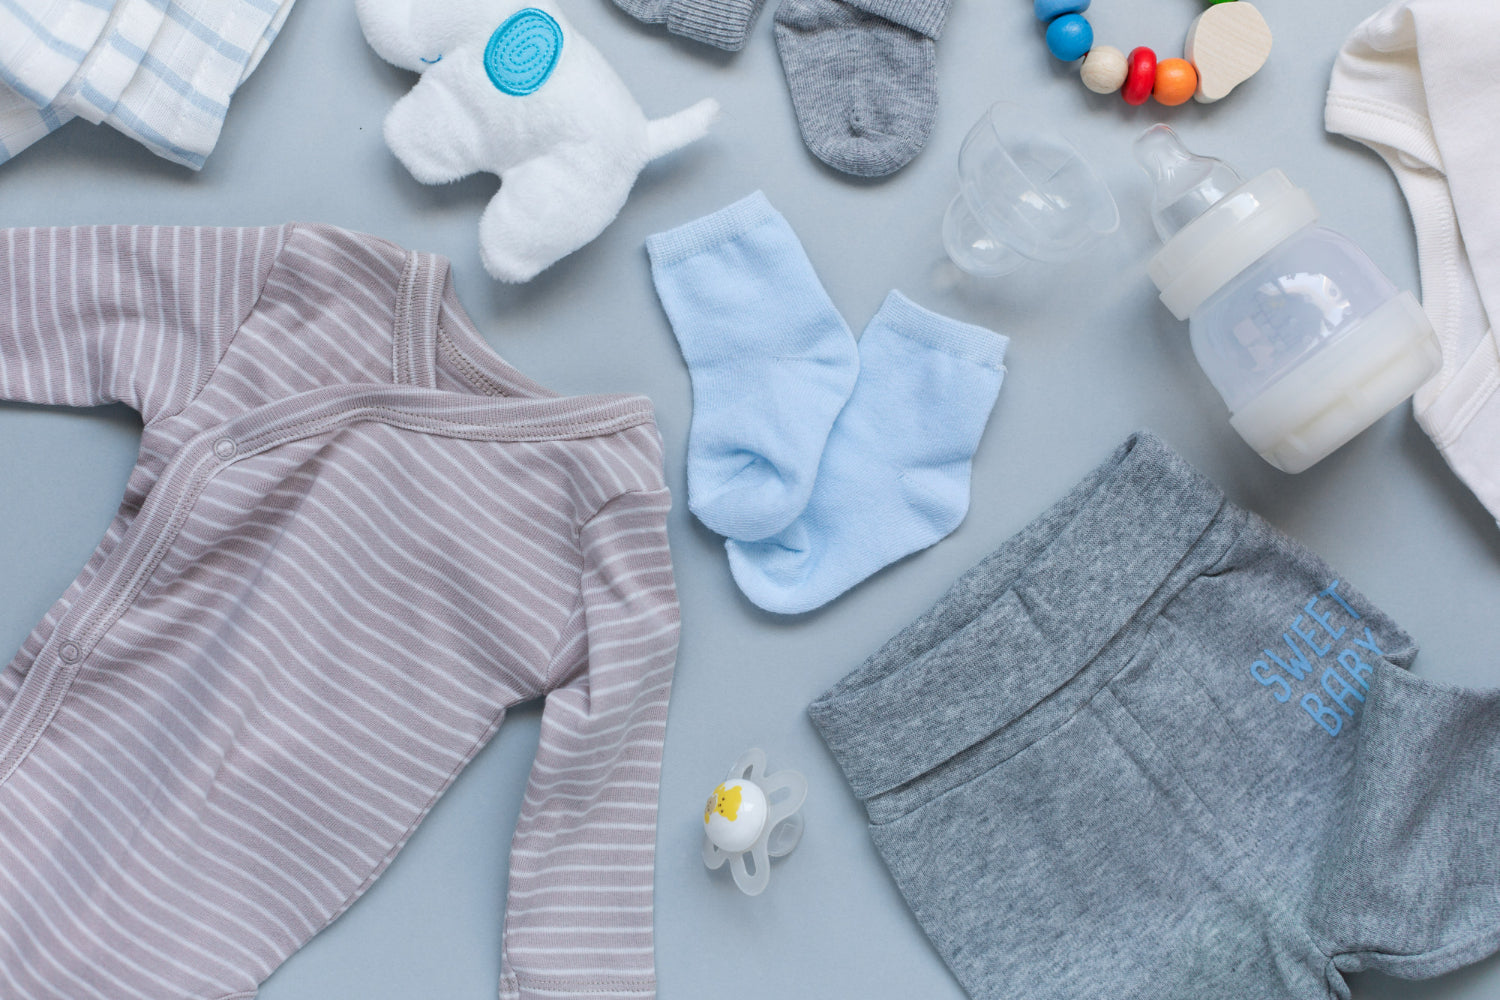 Stress-Free Newborn Baby Essentials Shopping at Your Fingertips